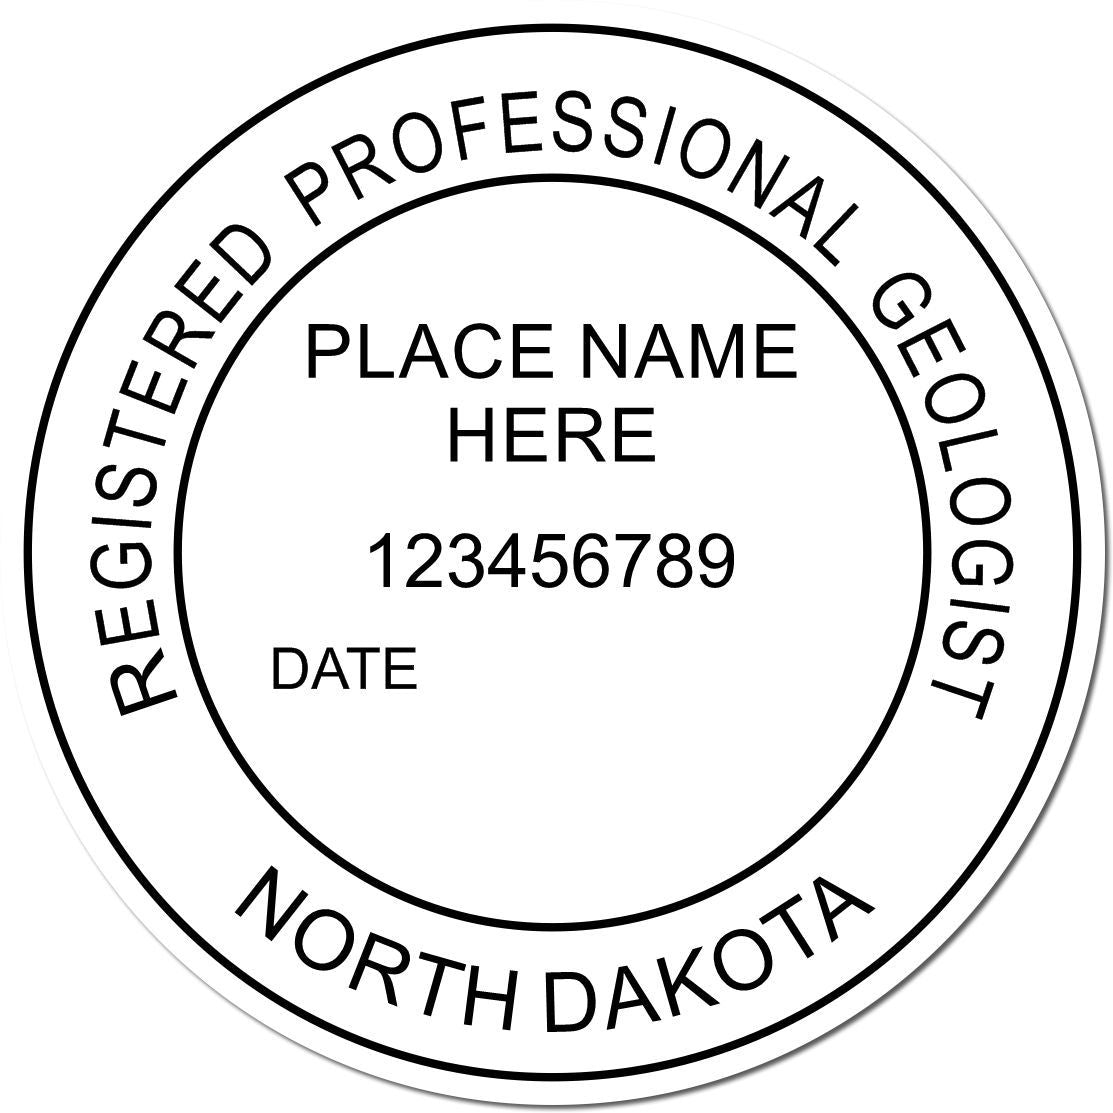 An alternative view of the Premium MaxLight Pre-Inked North Dakota Geology Stamp stamped on a sheet of paper showing the image in use